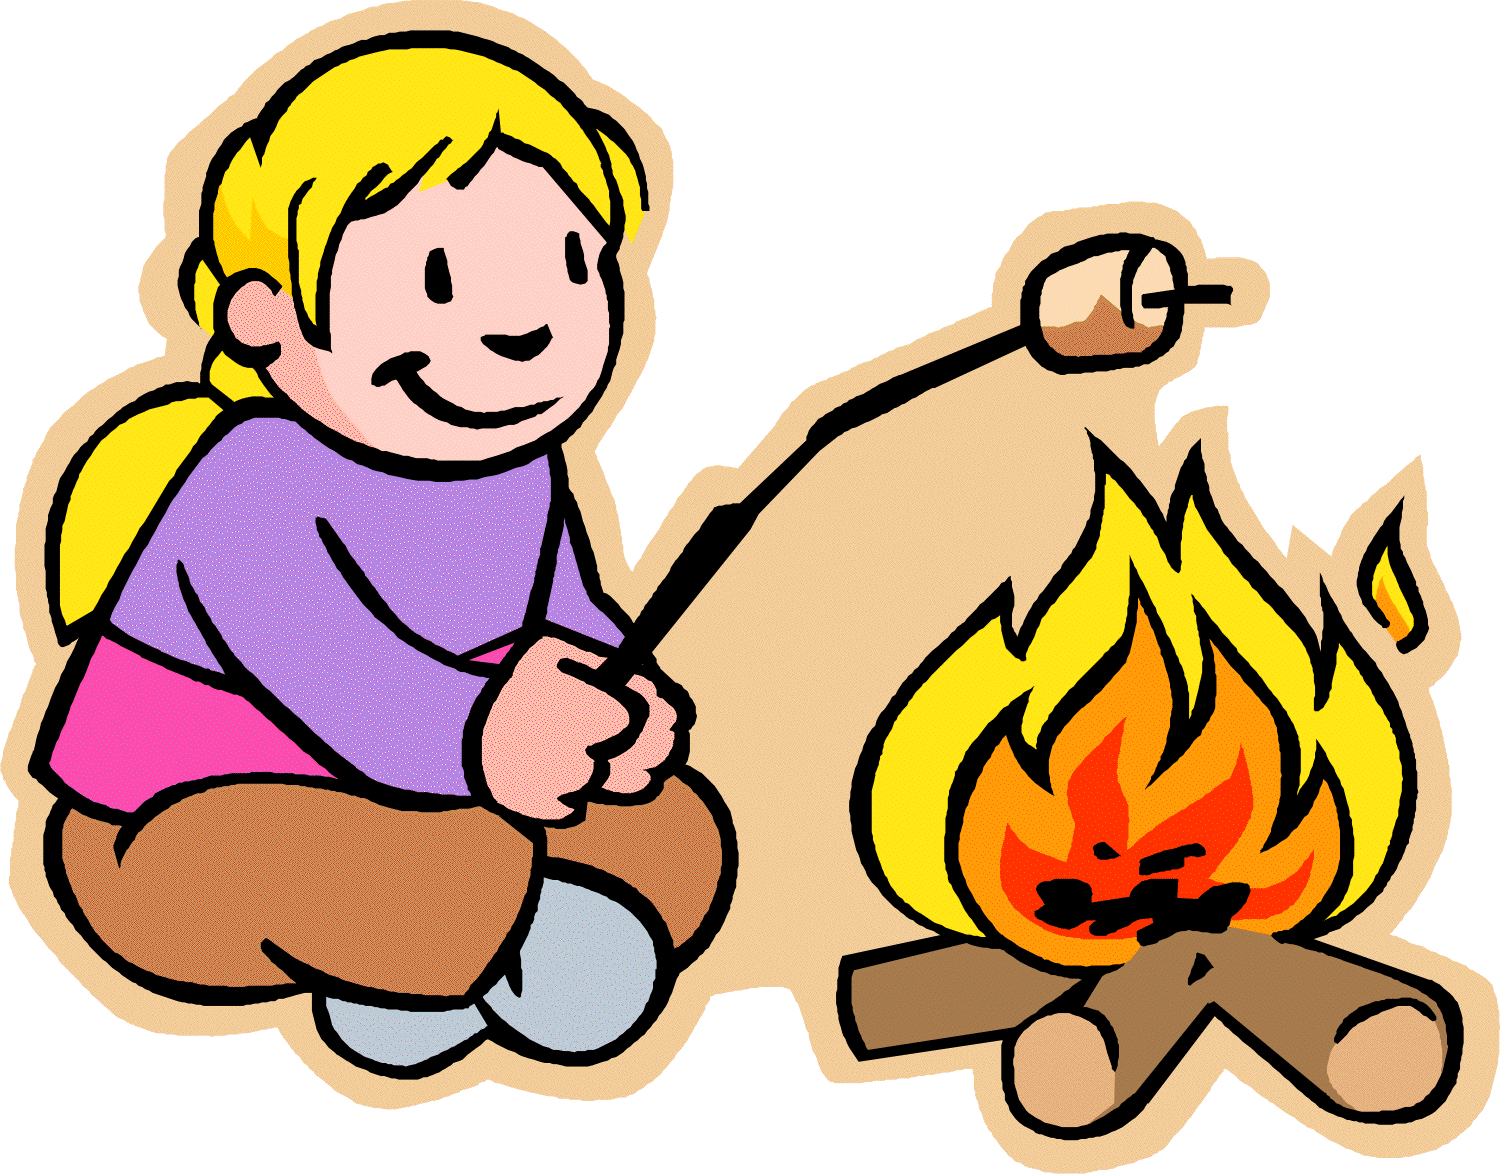 Campfire clipart camp fire image 4